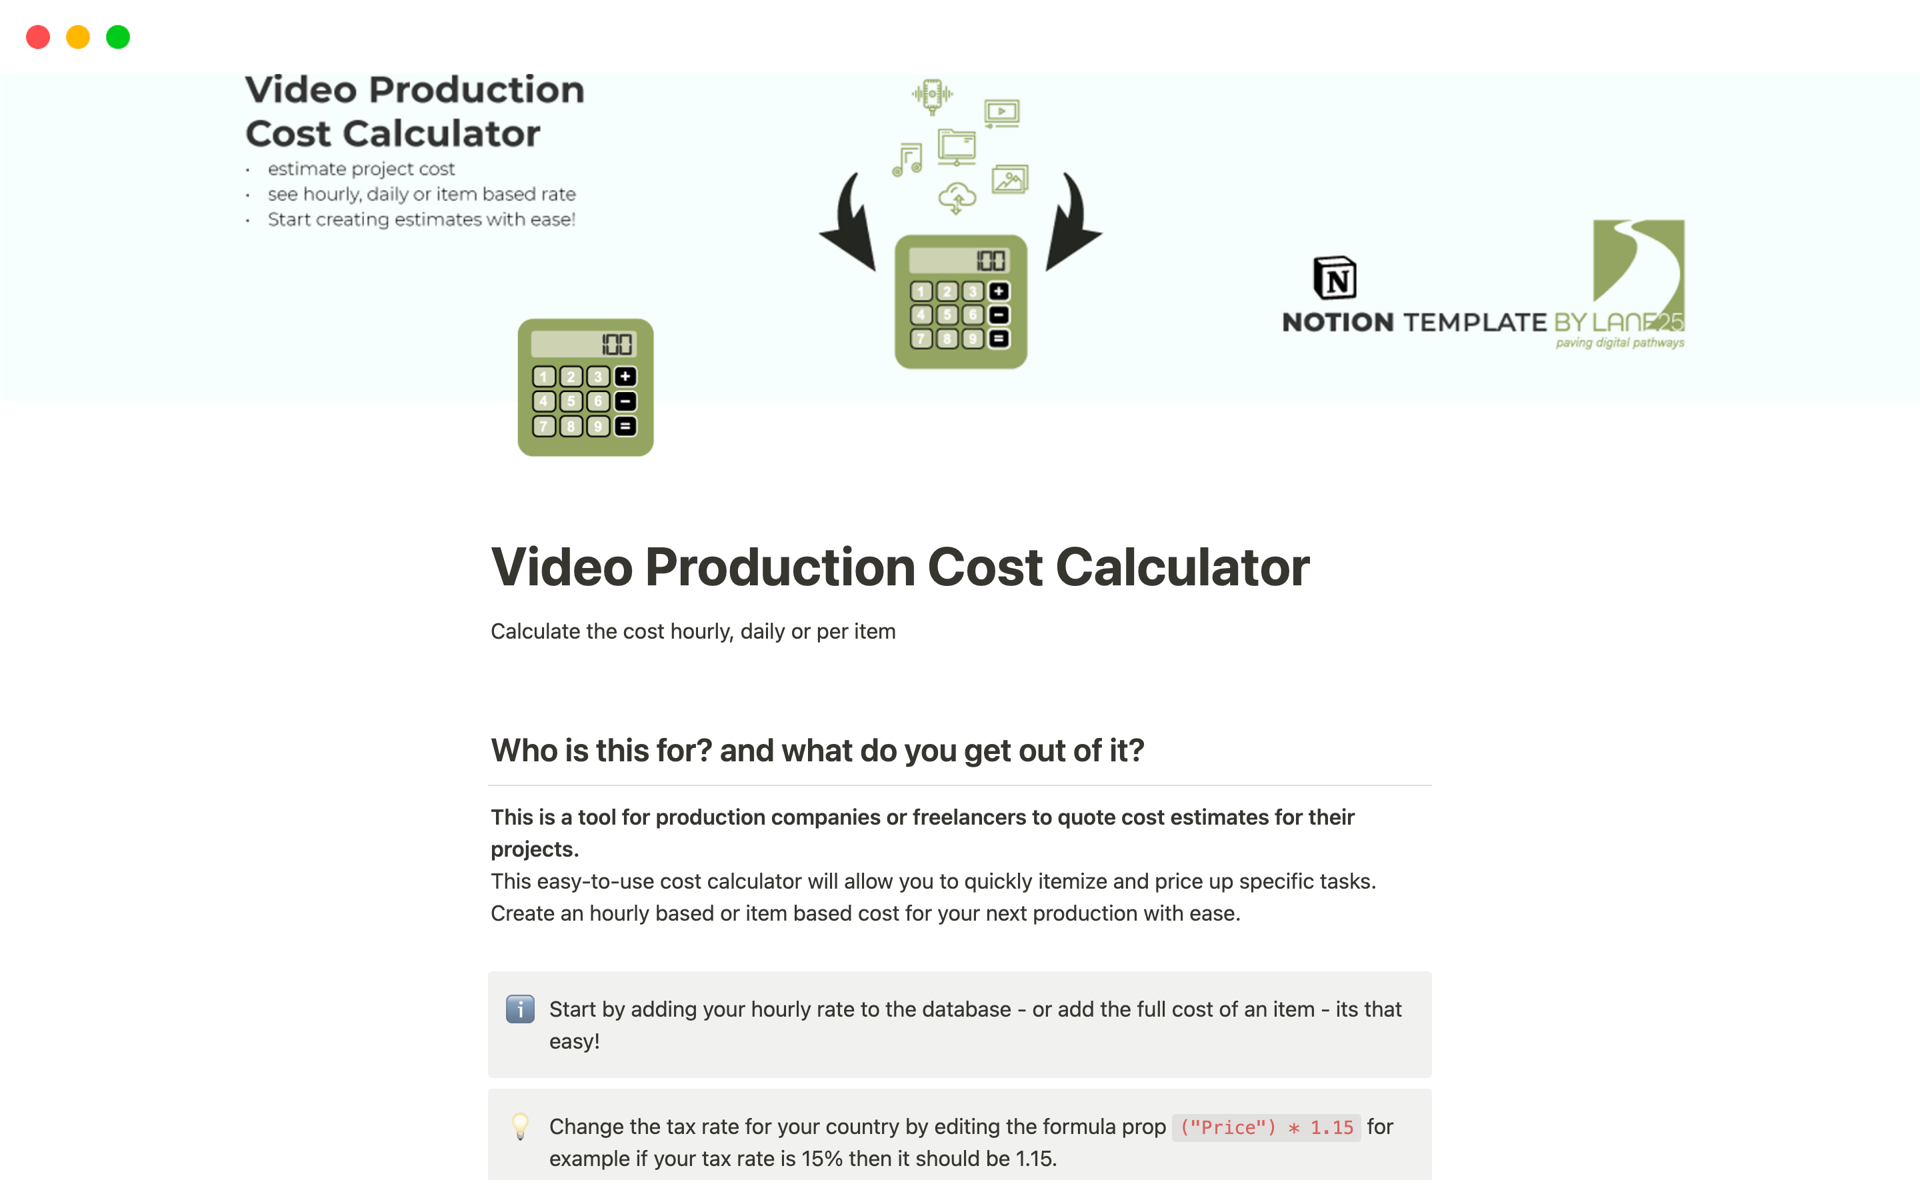 Estimate project cost, see hourly, daily or item based rate and start creating estimates with ease!
